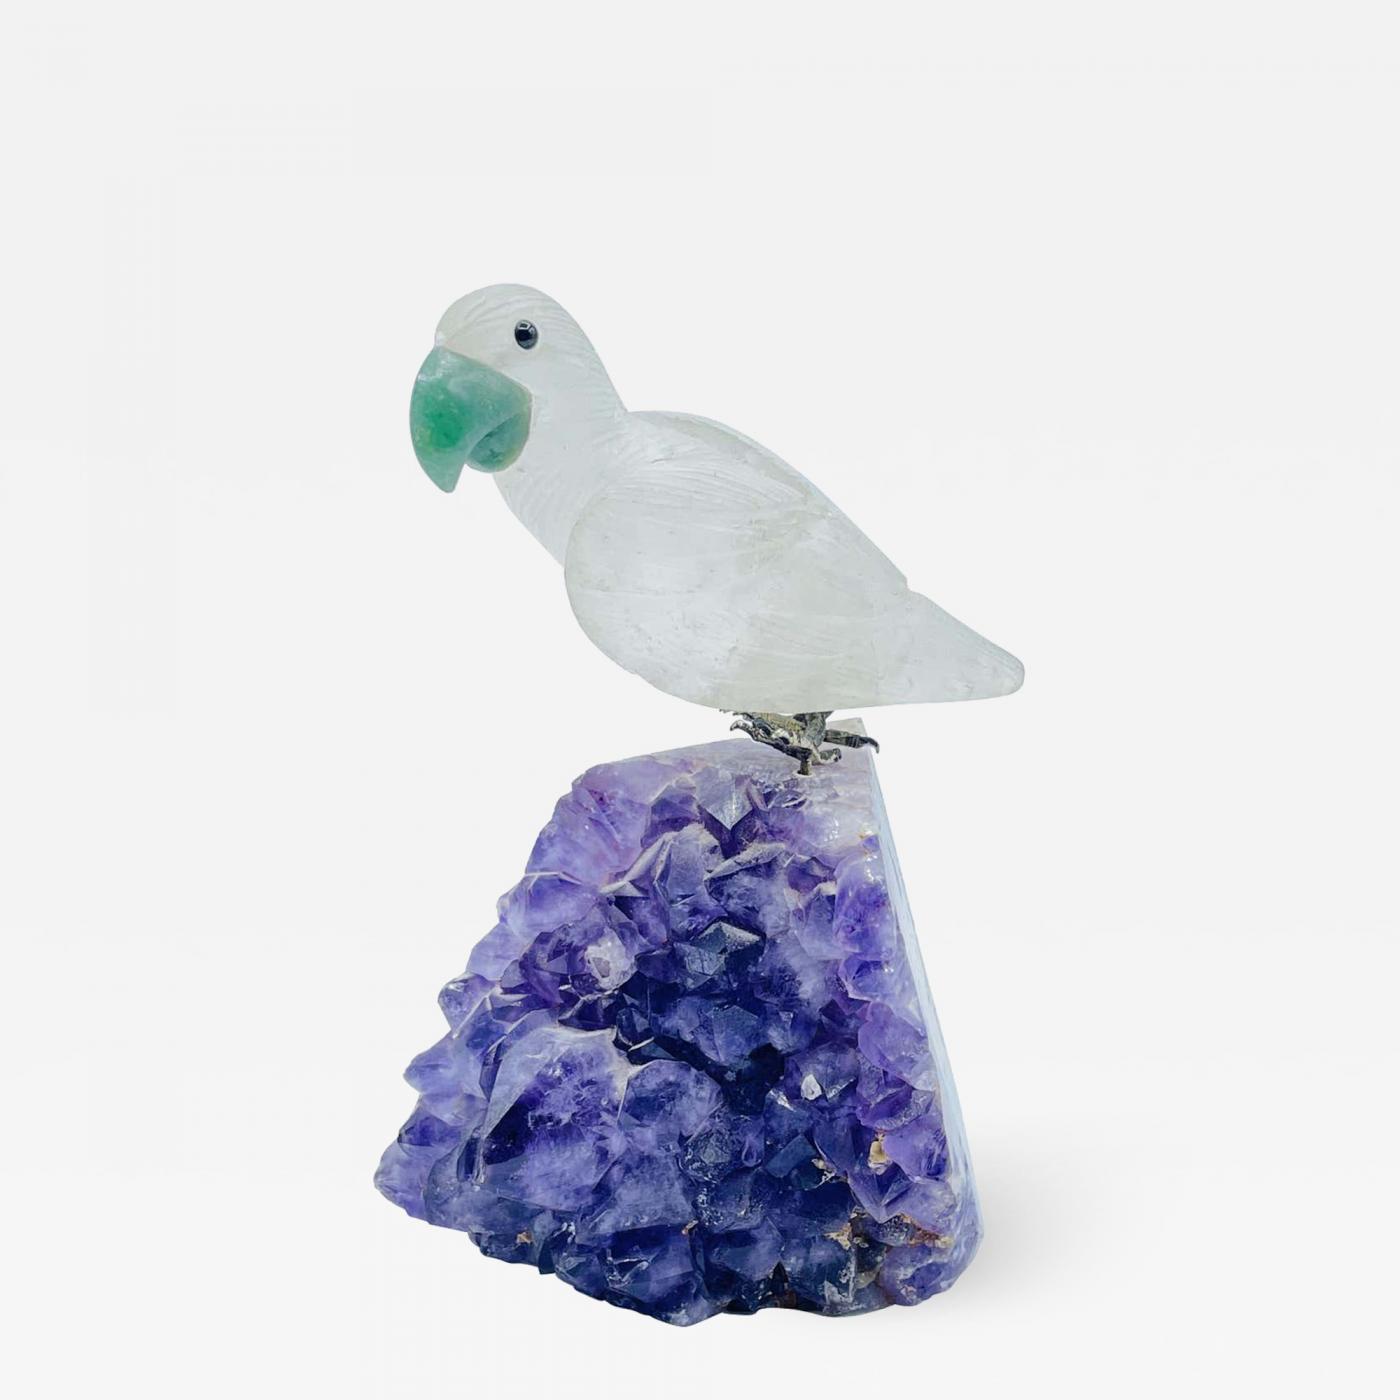 https://cdn.incollect.com/sites/default/files/zoom/Rock-Crystal-and-Amethyst-Geode-Sculpture-of-A-Carved-Parrot-Bird-485641-2139227.jpg